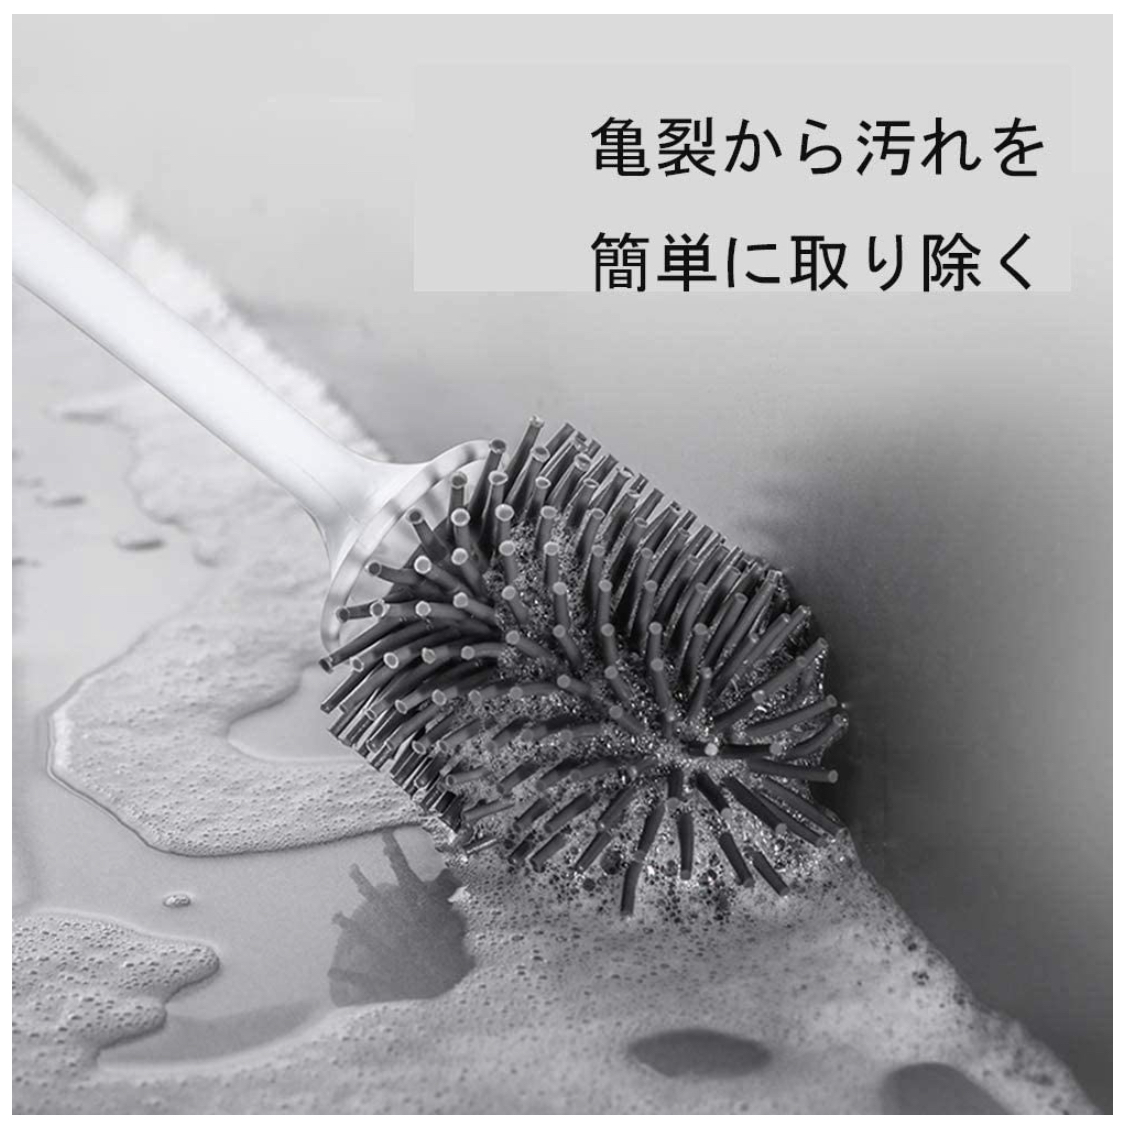  toilet brush soft ground type cleaning brush storage case attaching compact TPR material toilet cleaning scratch attaching not supplies sanitation toilet cleaning toilet cleaning cleaning brush 